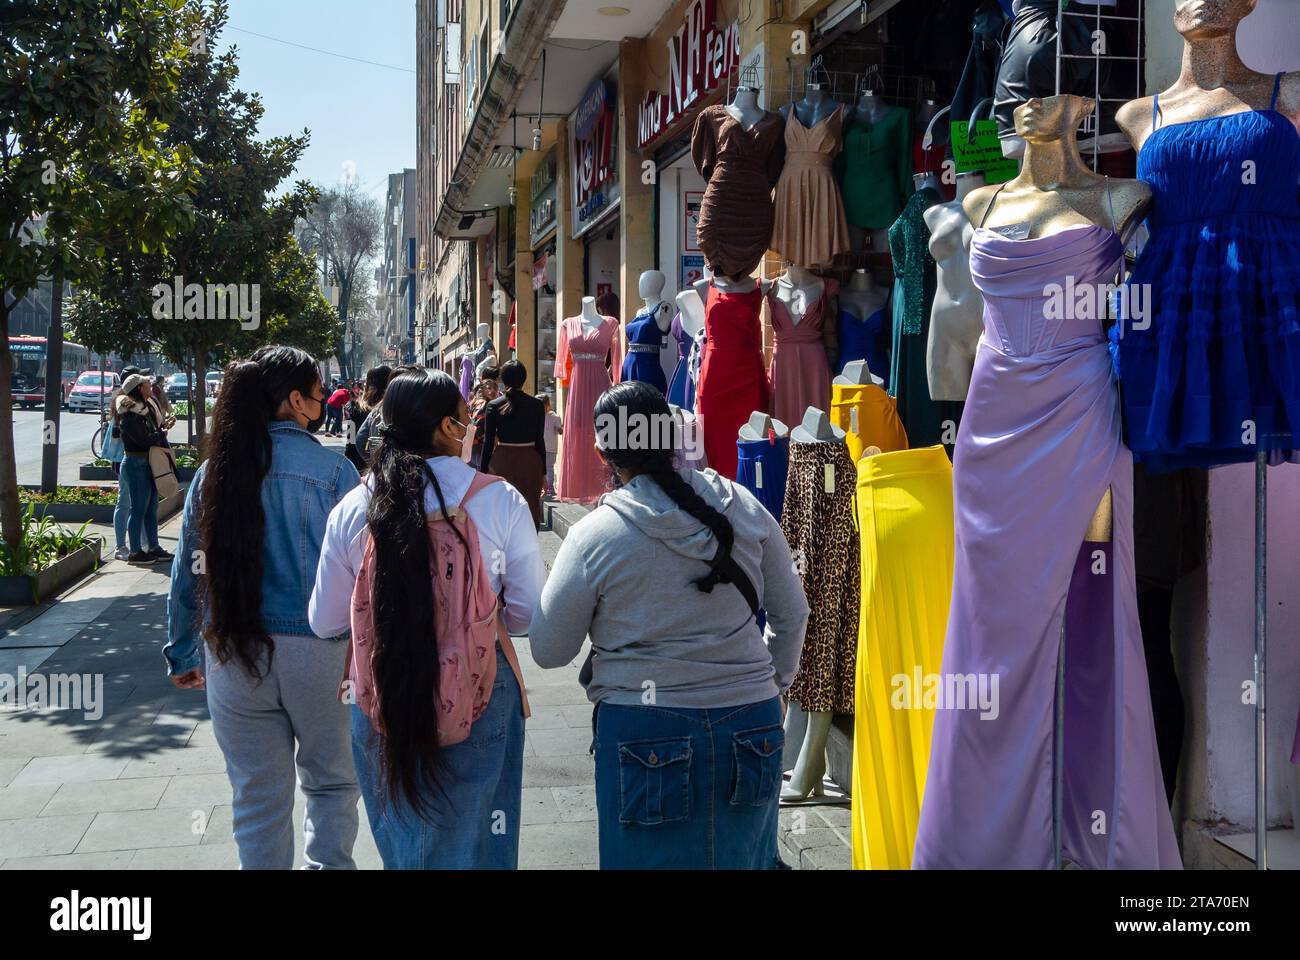 Mexico City, CDMX, Mexico, Mexican females walking in the street with clothing stores, Editorial only. Stock Photo